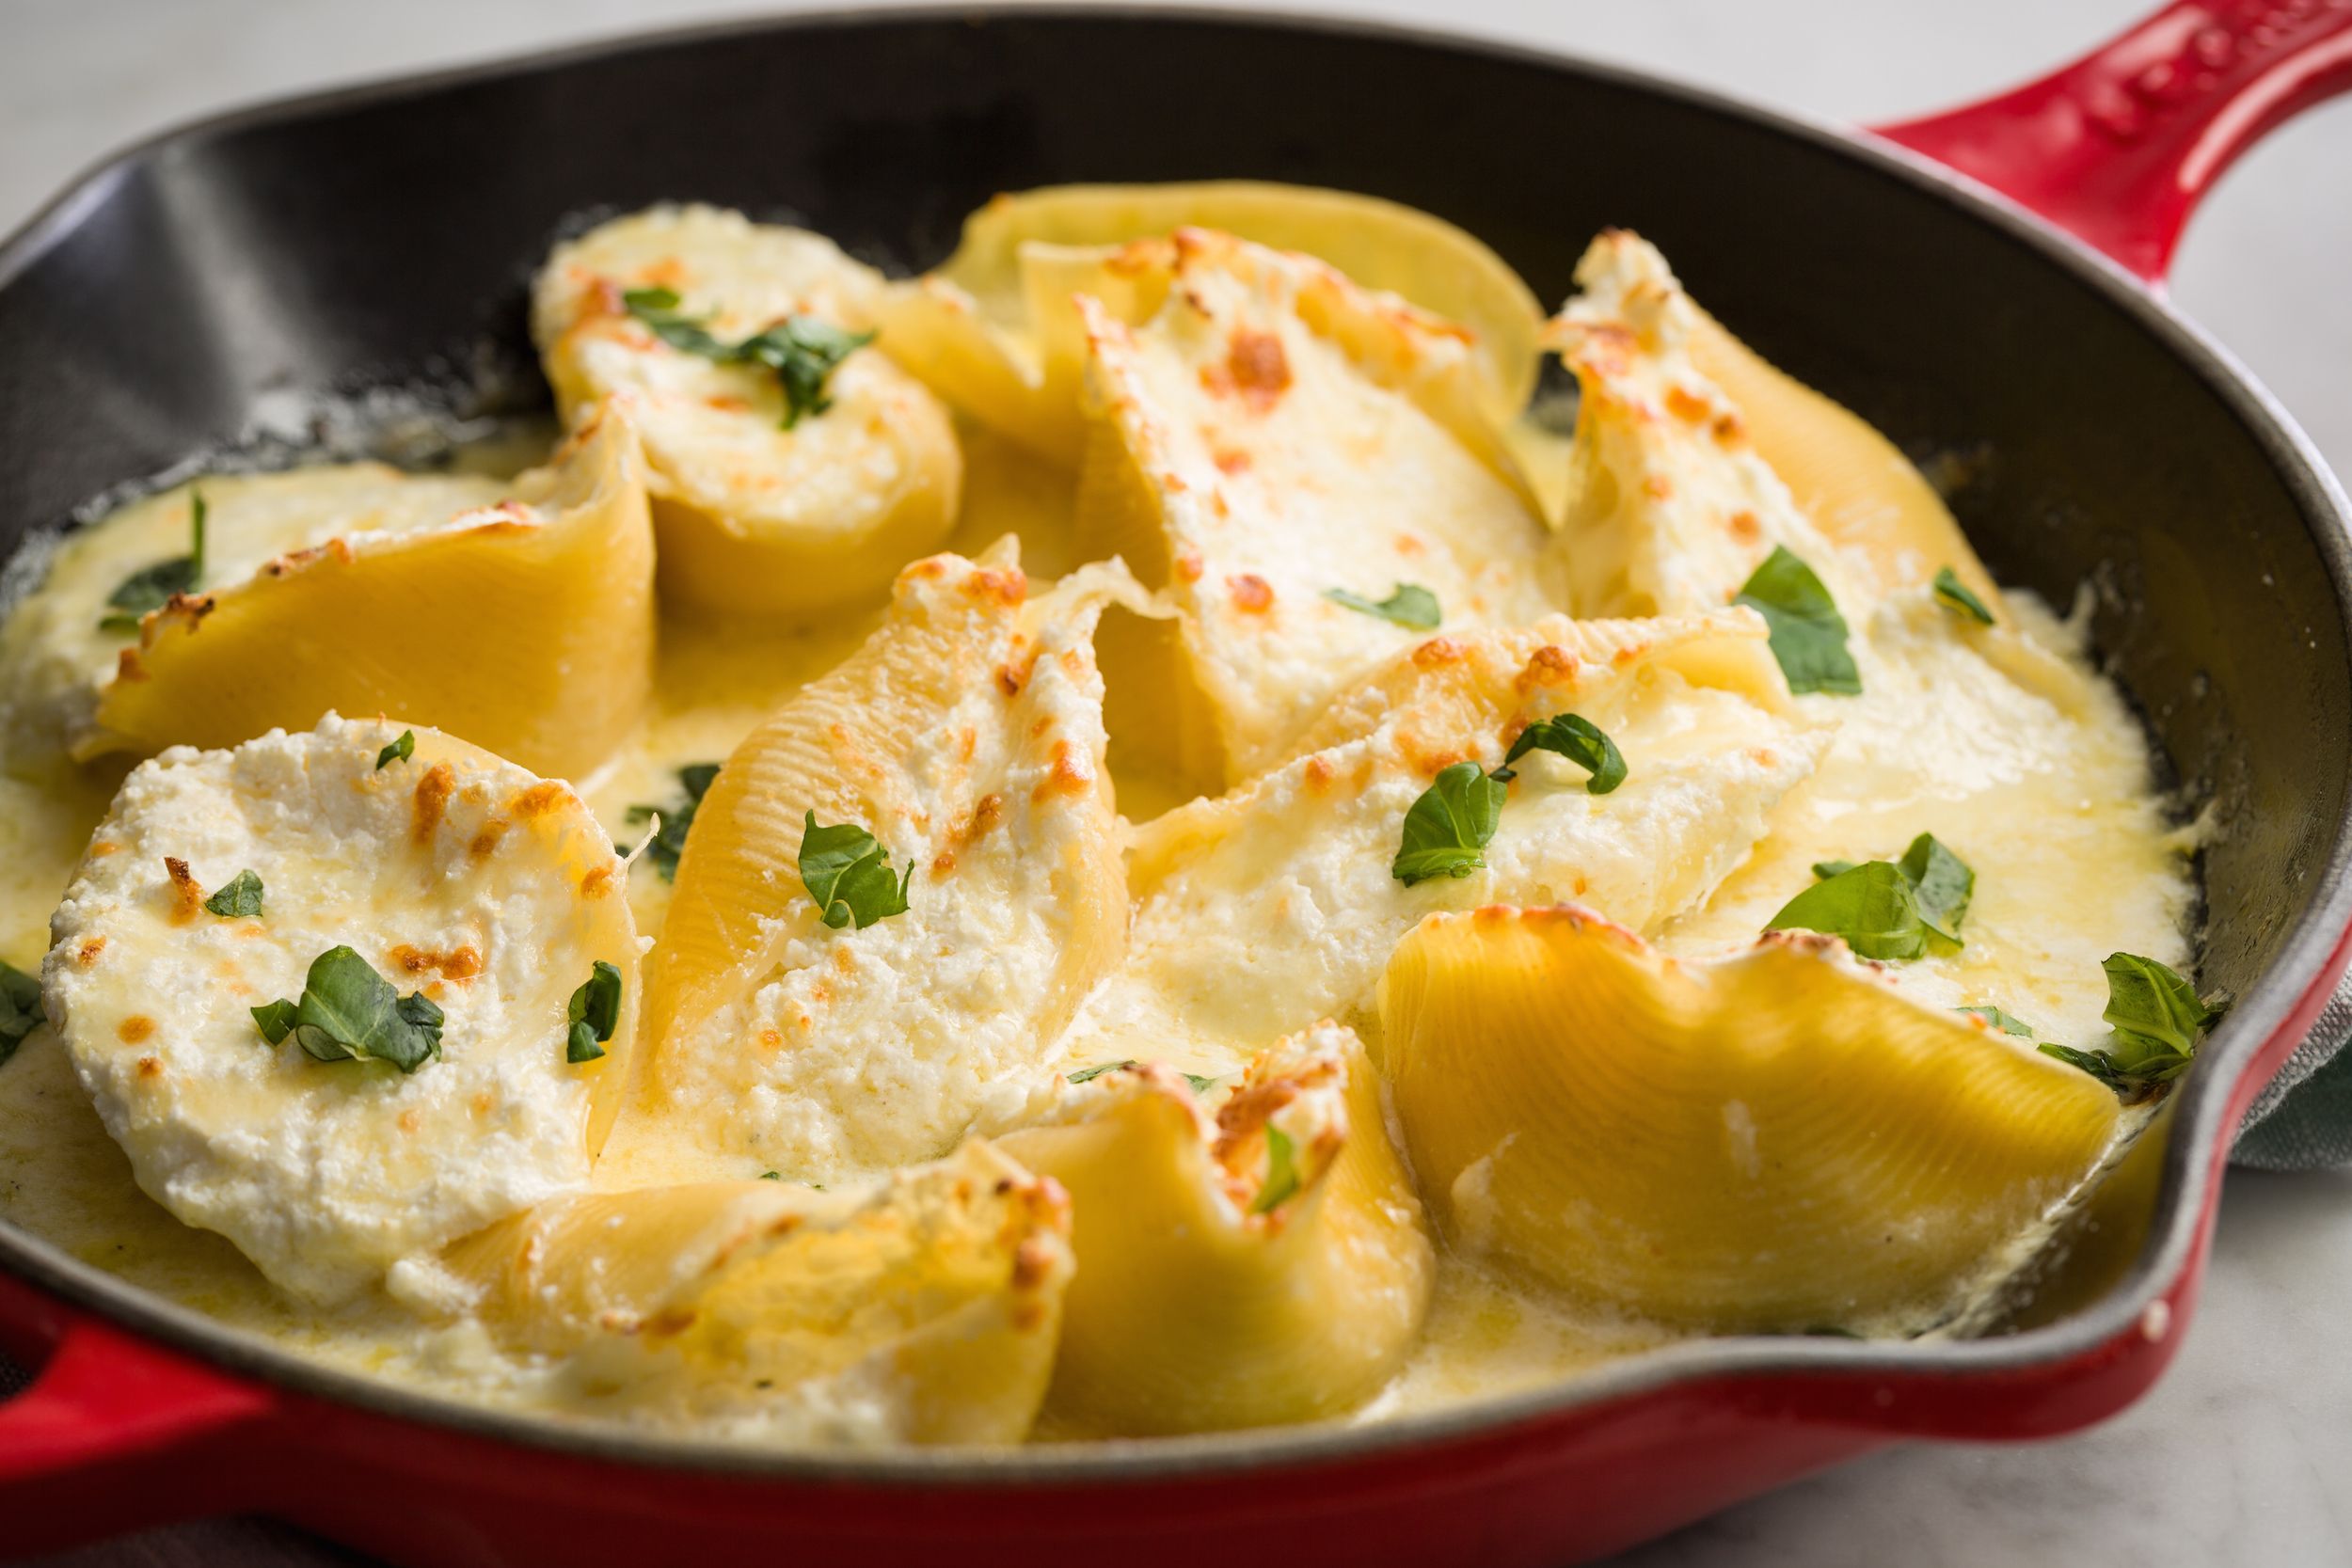 Cheese Shells with three kinds of a creamy white sauce